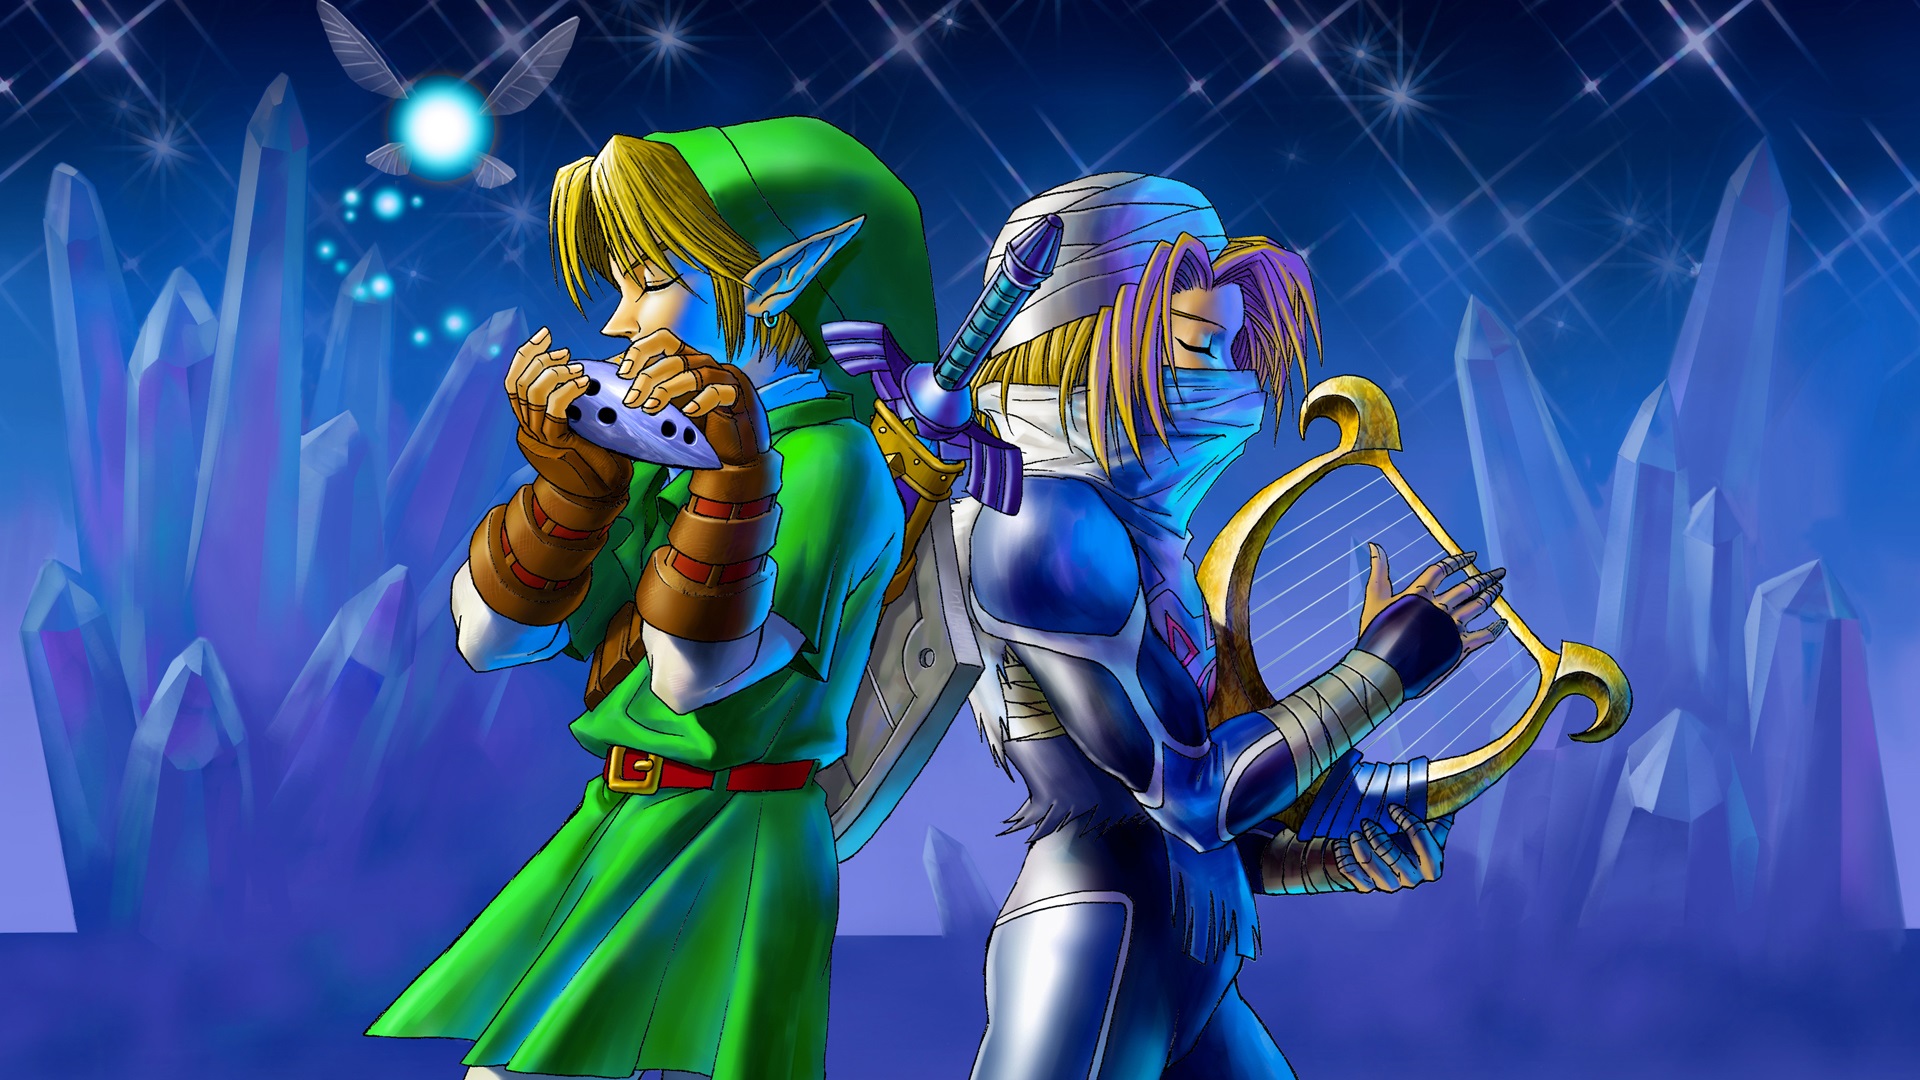 Is Ocarina of Time a time loop?